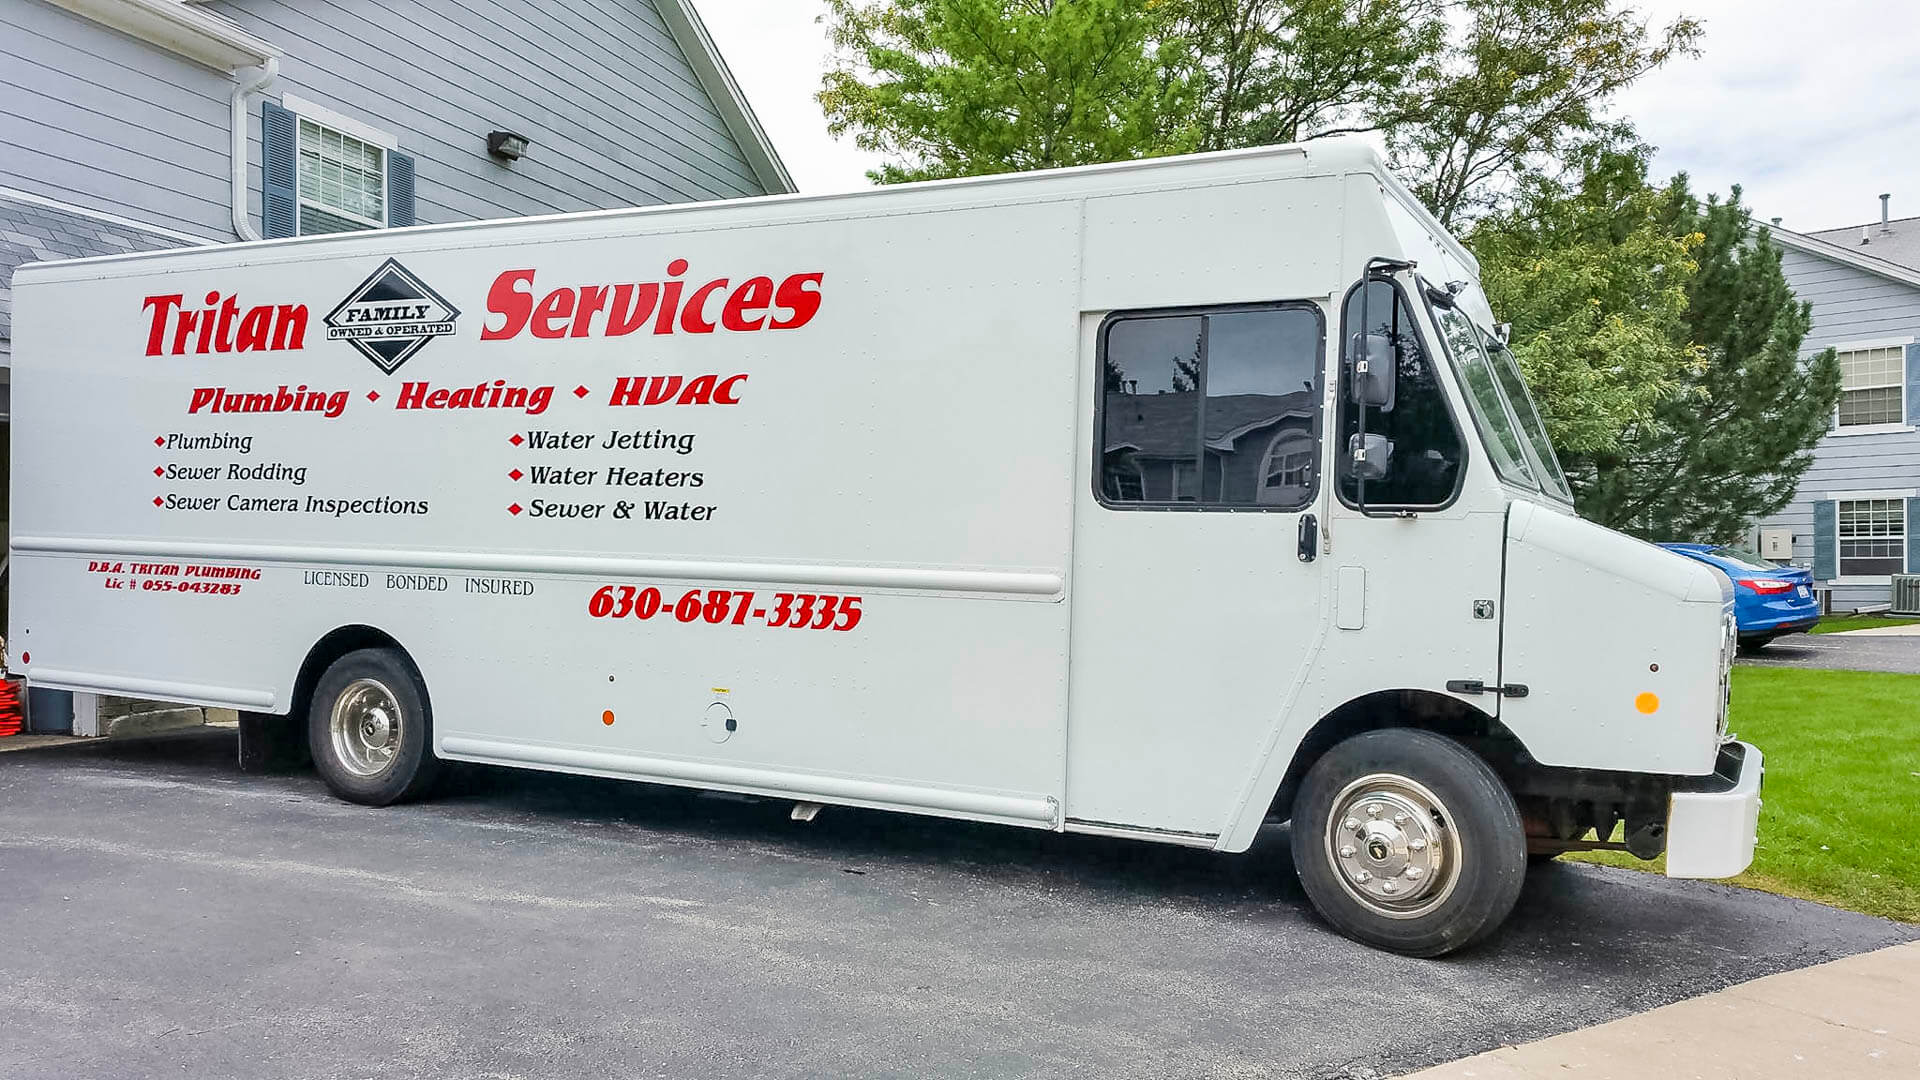 Photo of Tritan Services Heating and Cooling Truck